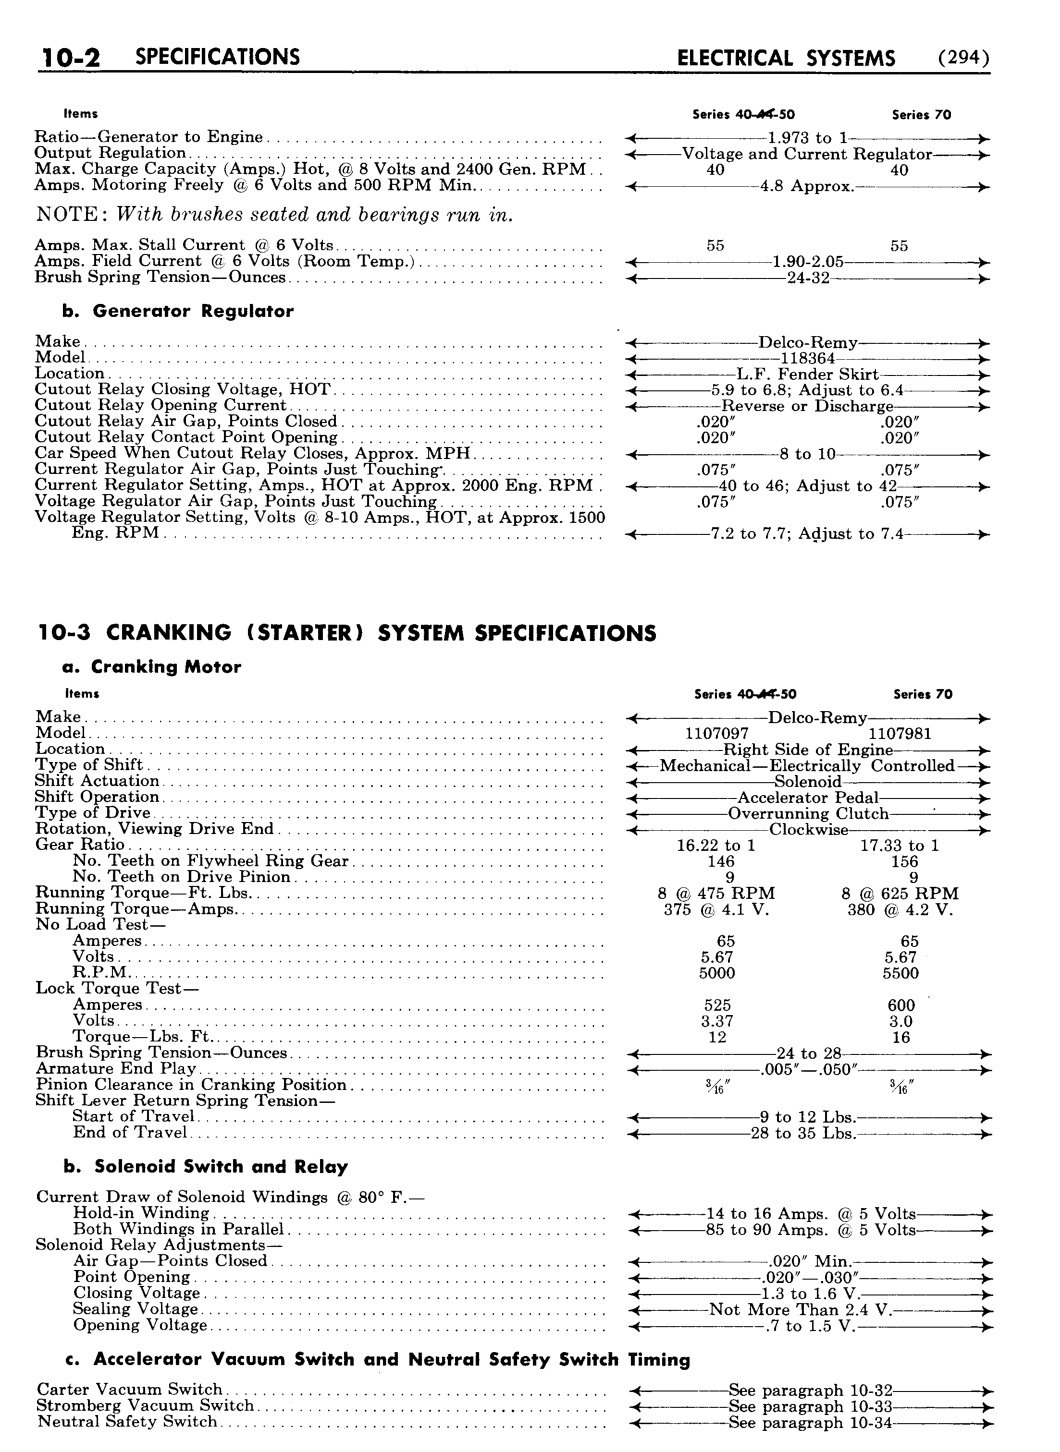 n_11 1951 Buick Shop Manual - Electrical Systems-002-002.jpg